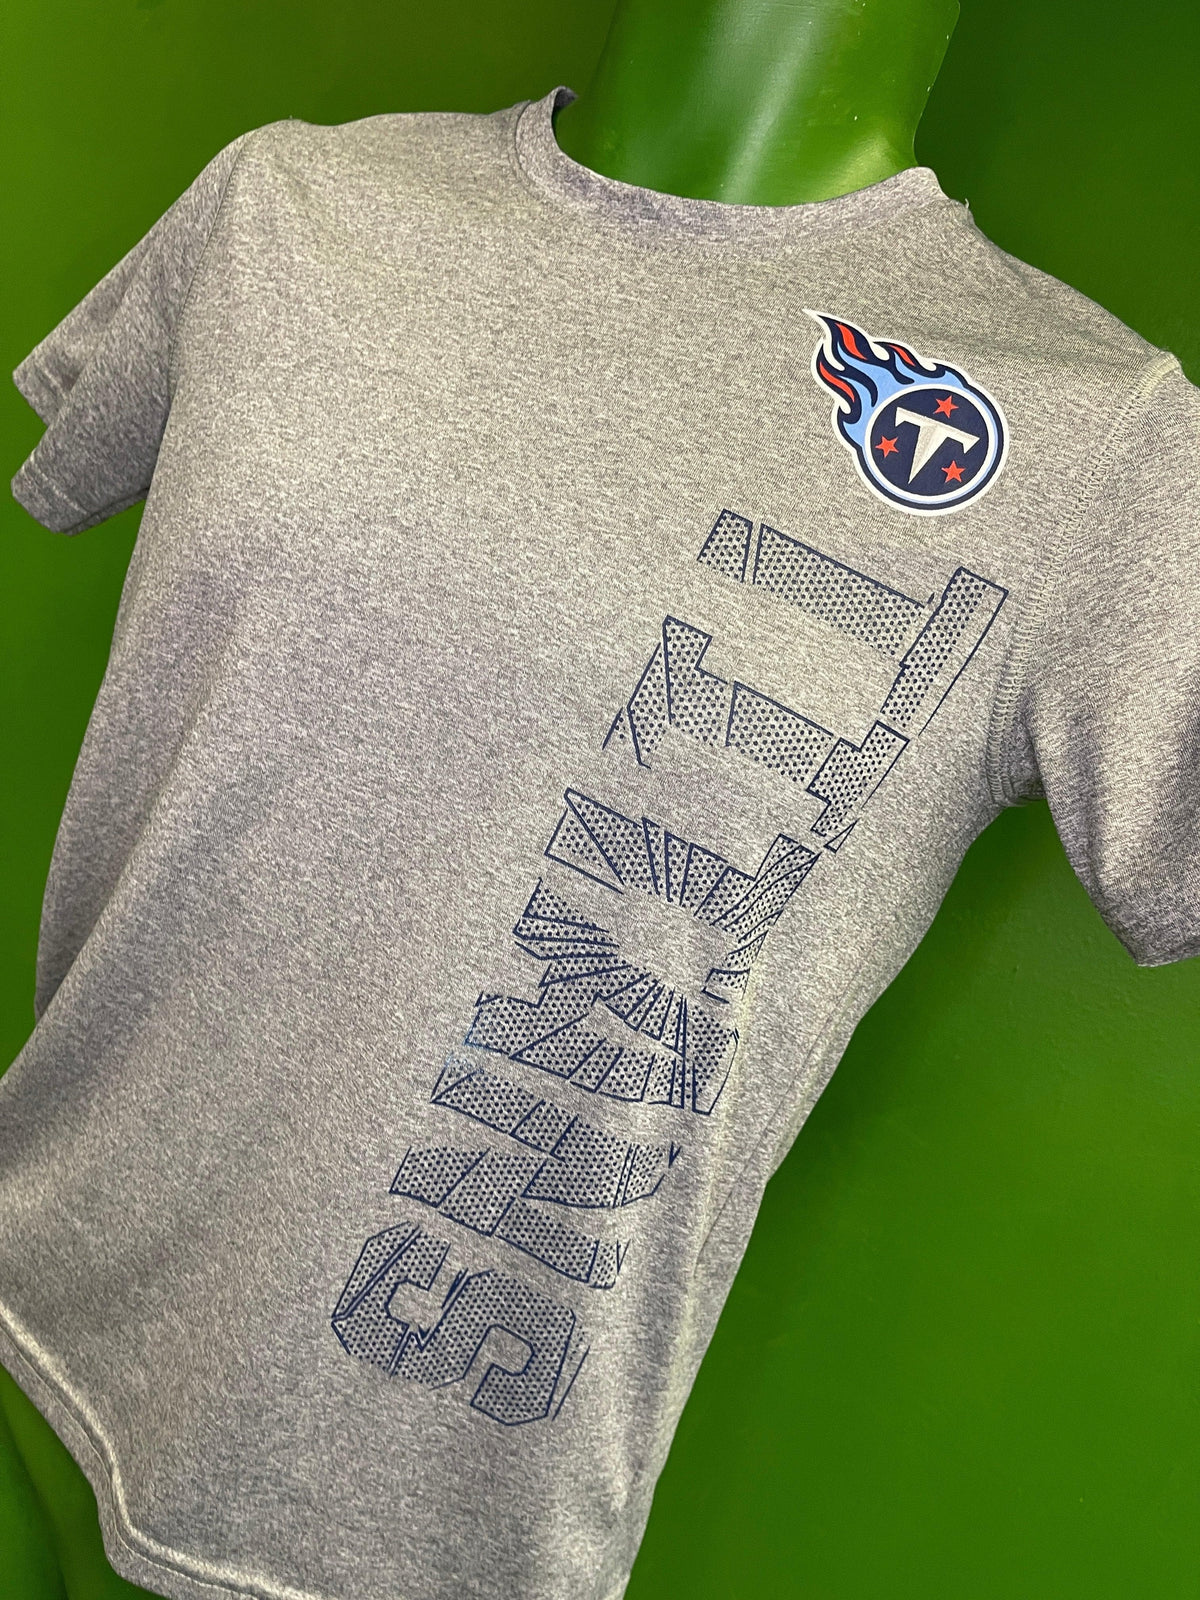 NFL Tennessee Titans Heathered Grey T-Shirt Youth Medium 10-12